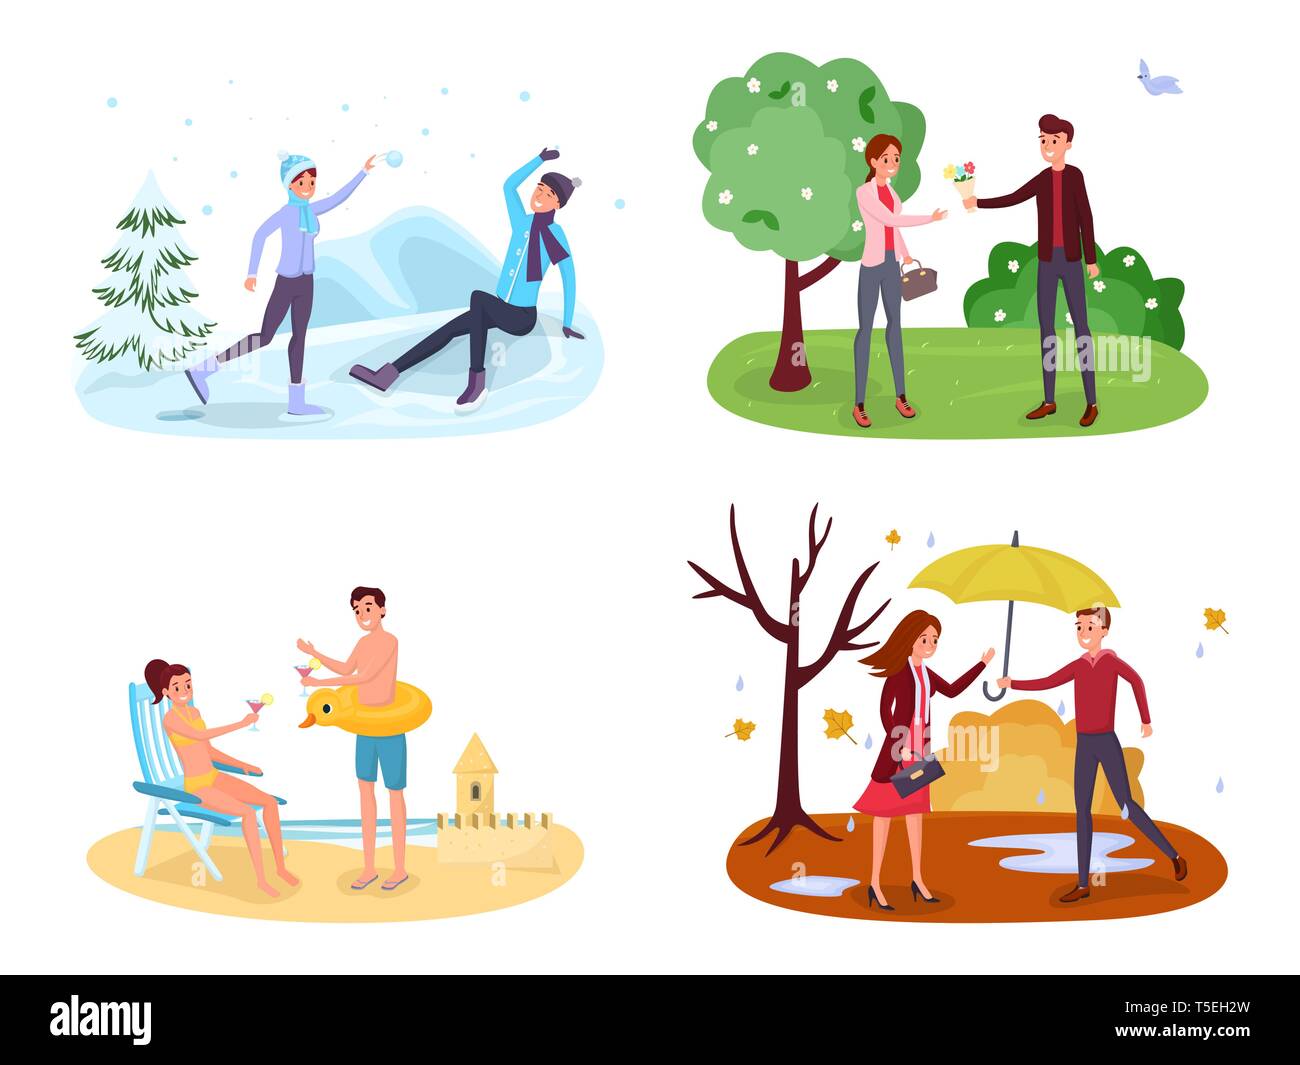 Seasonal outdoor activities vector illustrations set. Winter games, spring landscape, summer holiday vacation, autumn rain. Man and woman playing snowballs, strolling in park, sunbathing cliparts pack Stock Vector